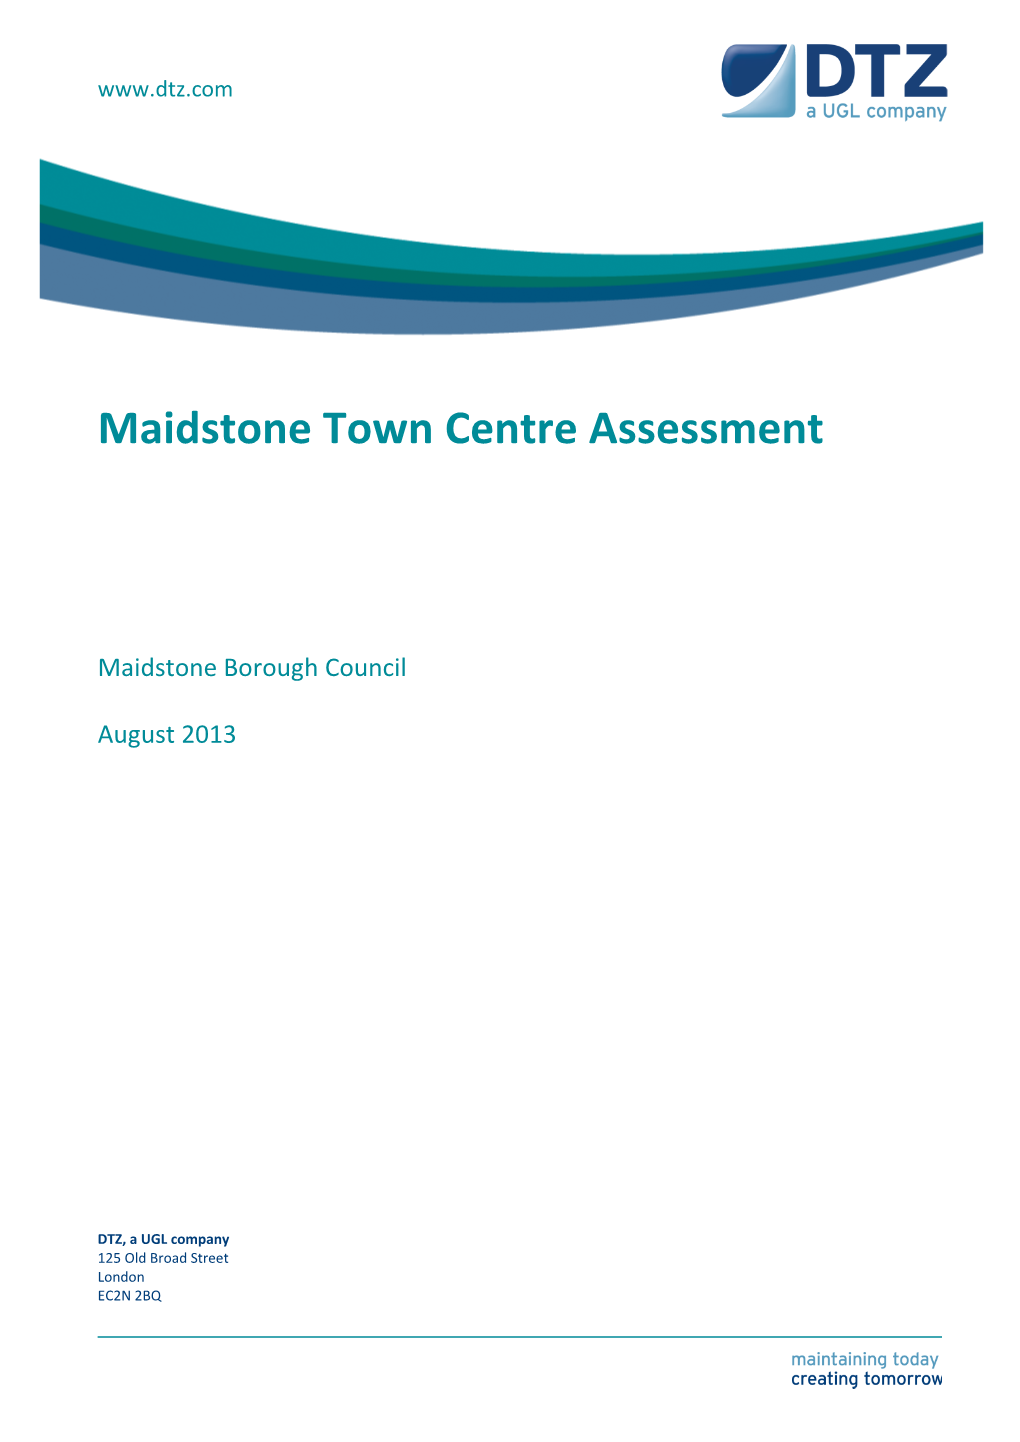 Maidstone Town Centre Assessment